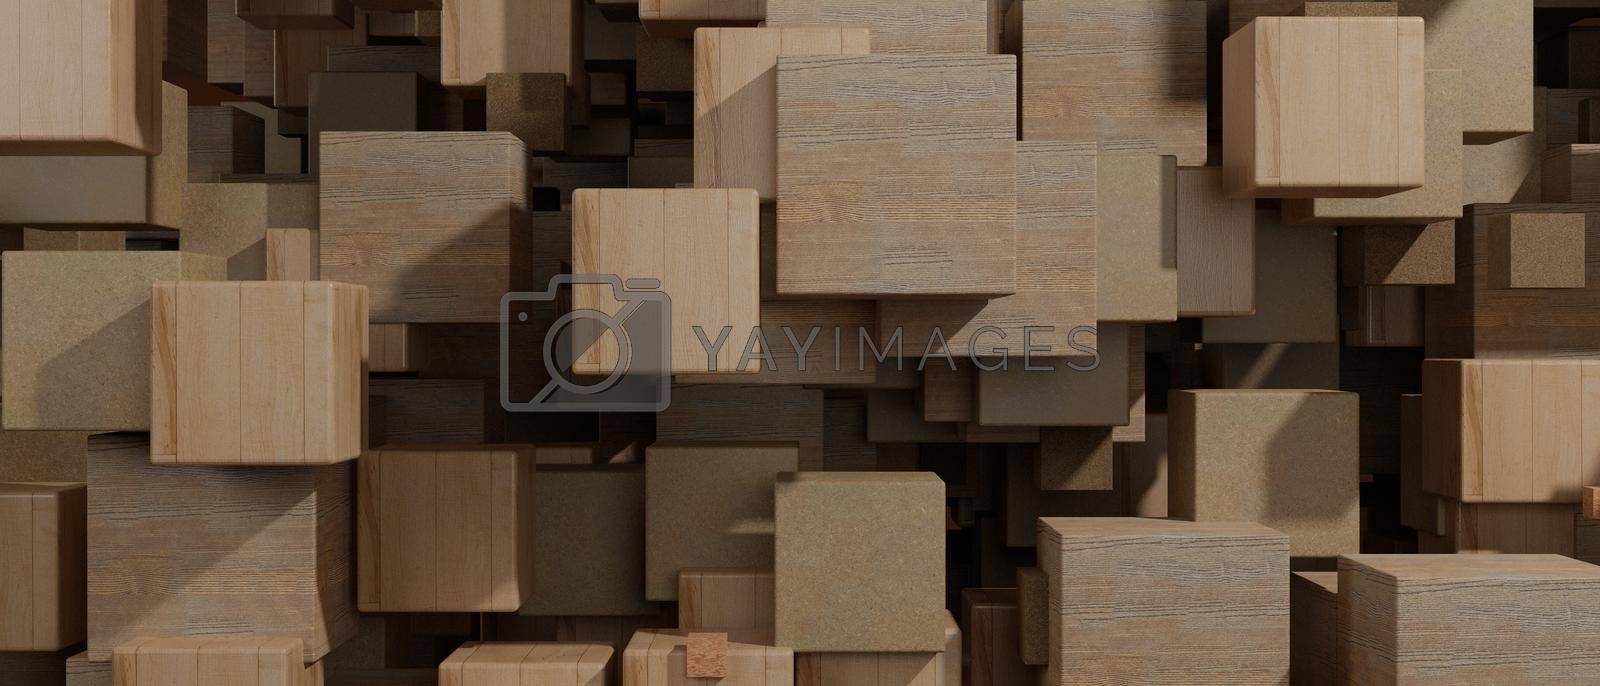 Royalty free image of Stack wooden blocks from natural wood background 3D Illustration by yay_lmrb